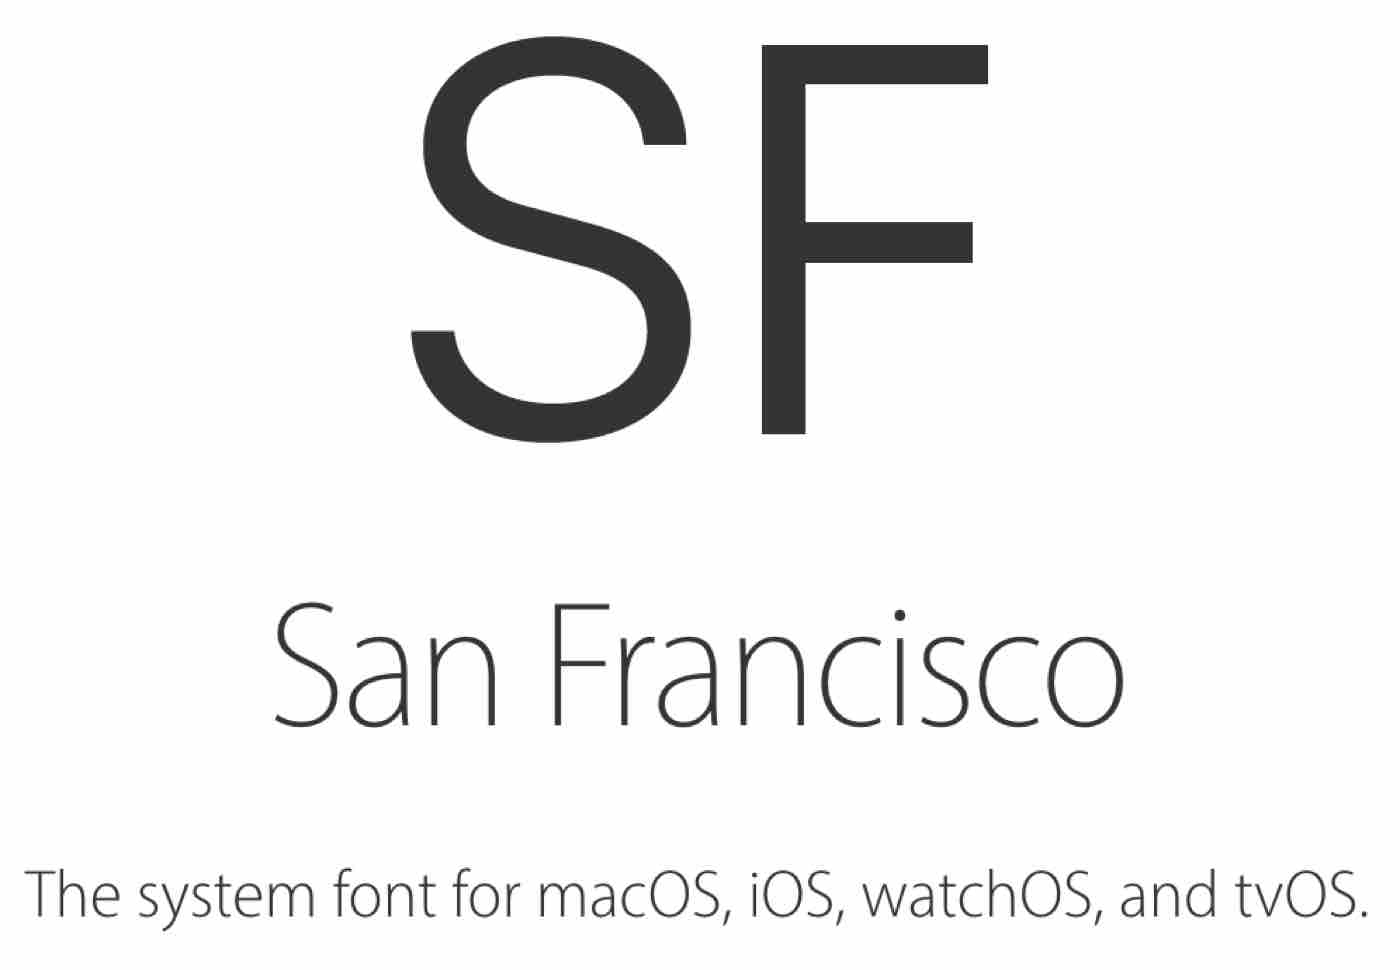 what is the system font for mac high sierra?